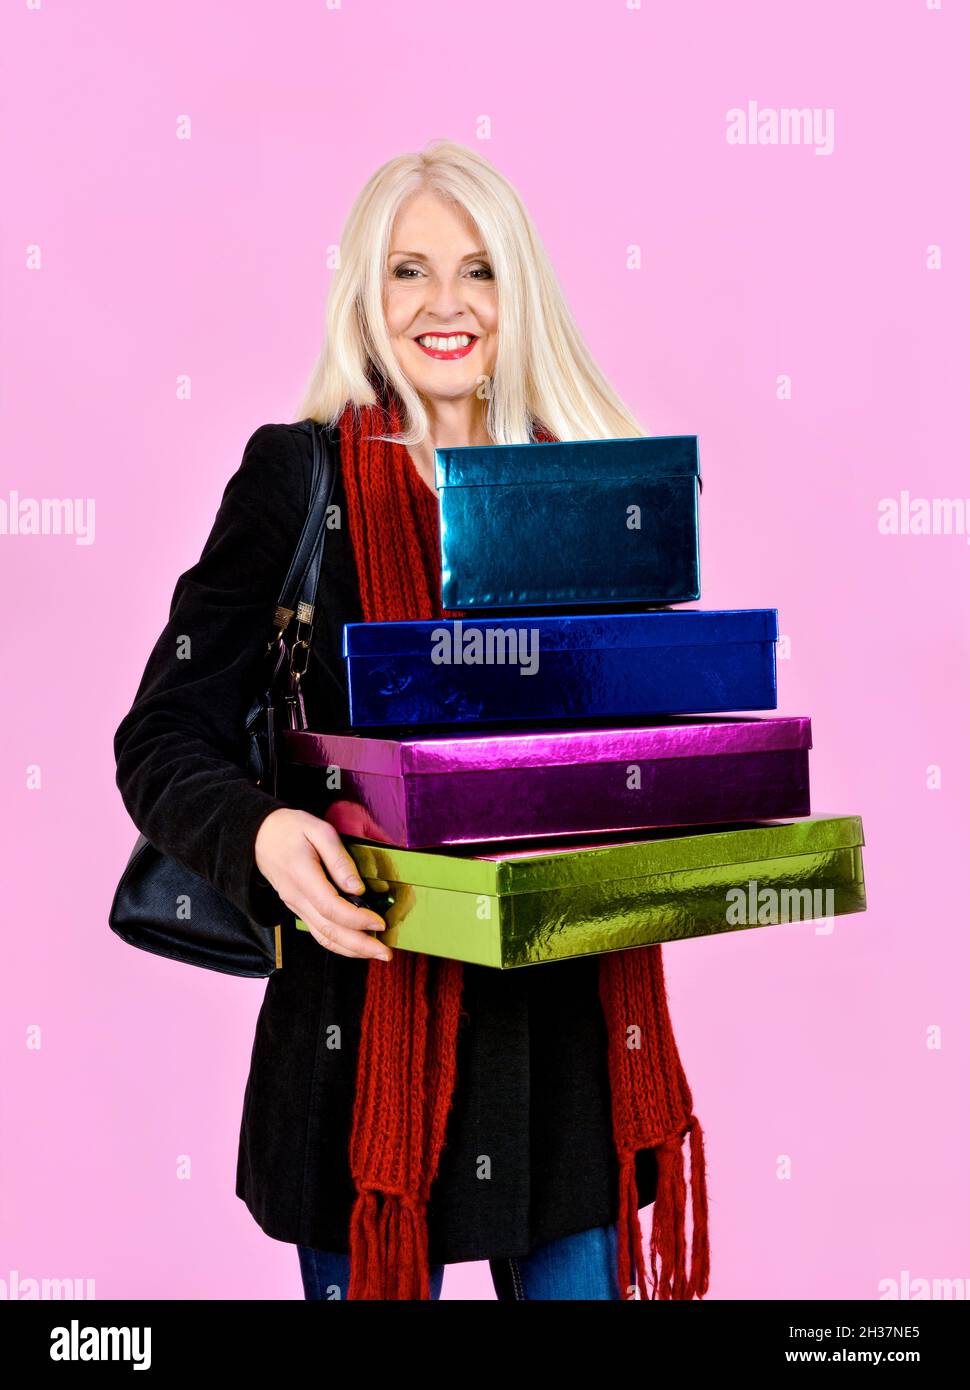 Attractive Blonde Lady dressed in coat and scarf laughing whilst carrying lots of coloured boxes or presents, taken on pink background Stock Photo